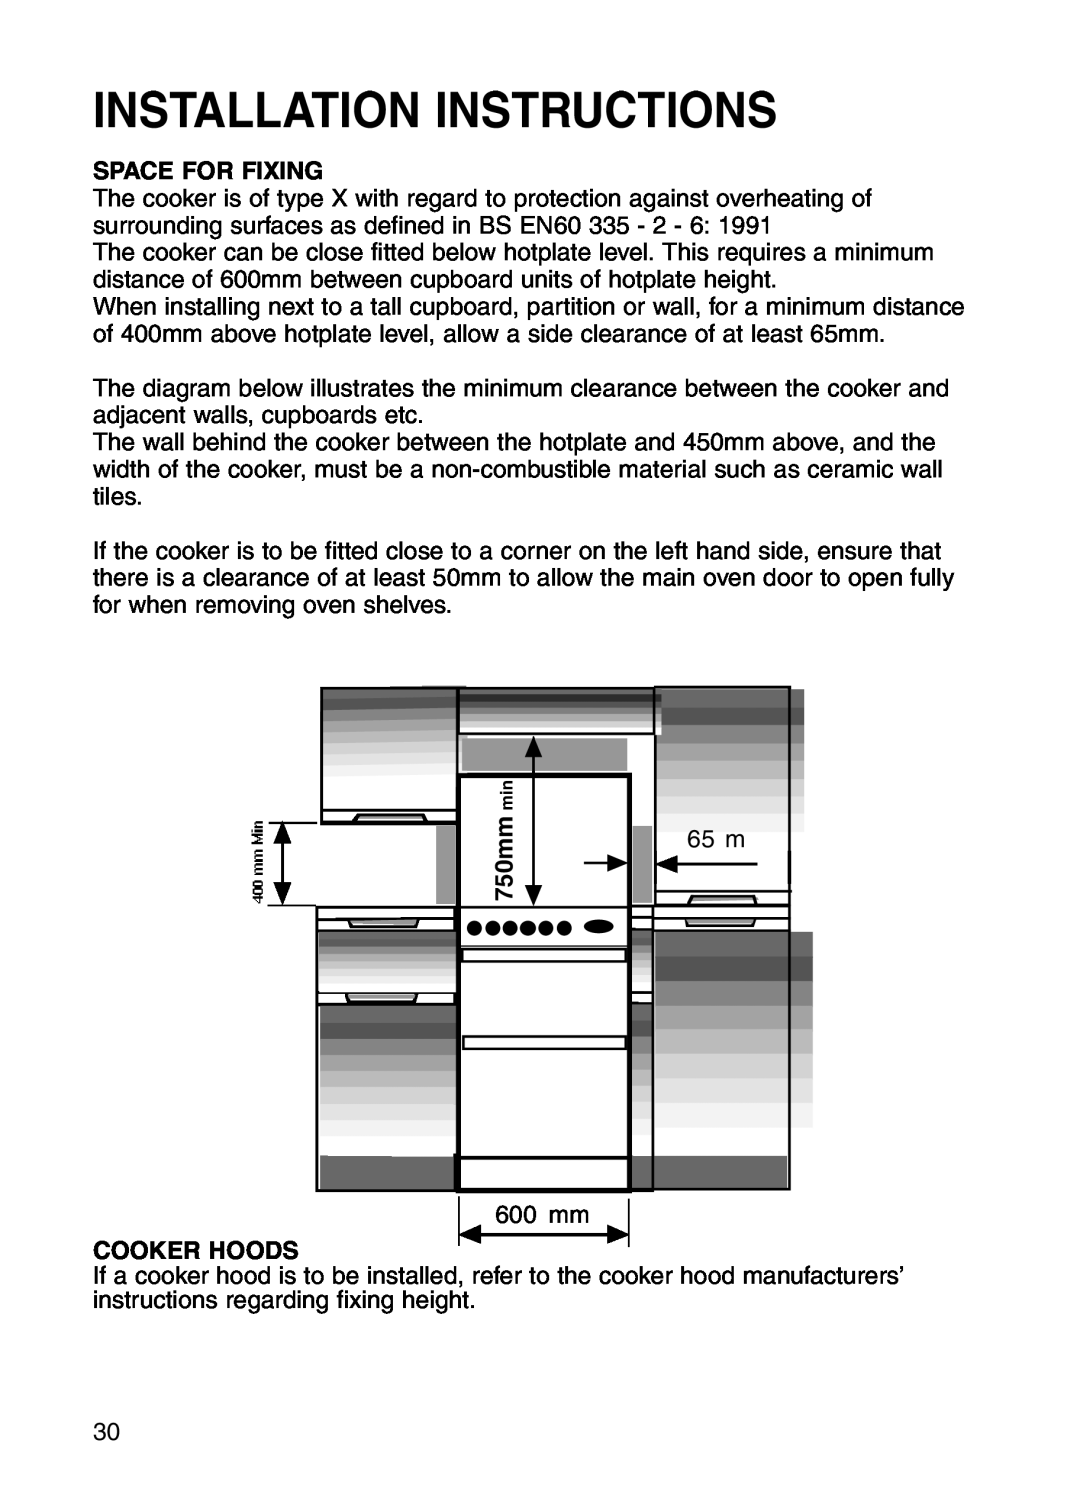 Hotpoint GW81 manual Installation Instructions, Space For Fixing, 750mm, 65 m, Cooker Hoods 